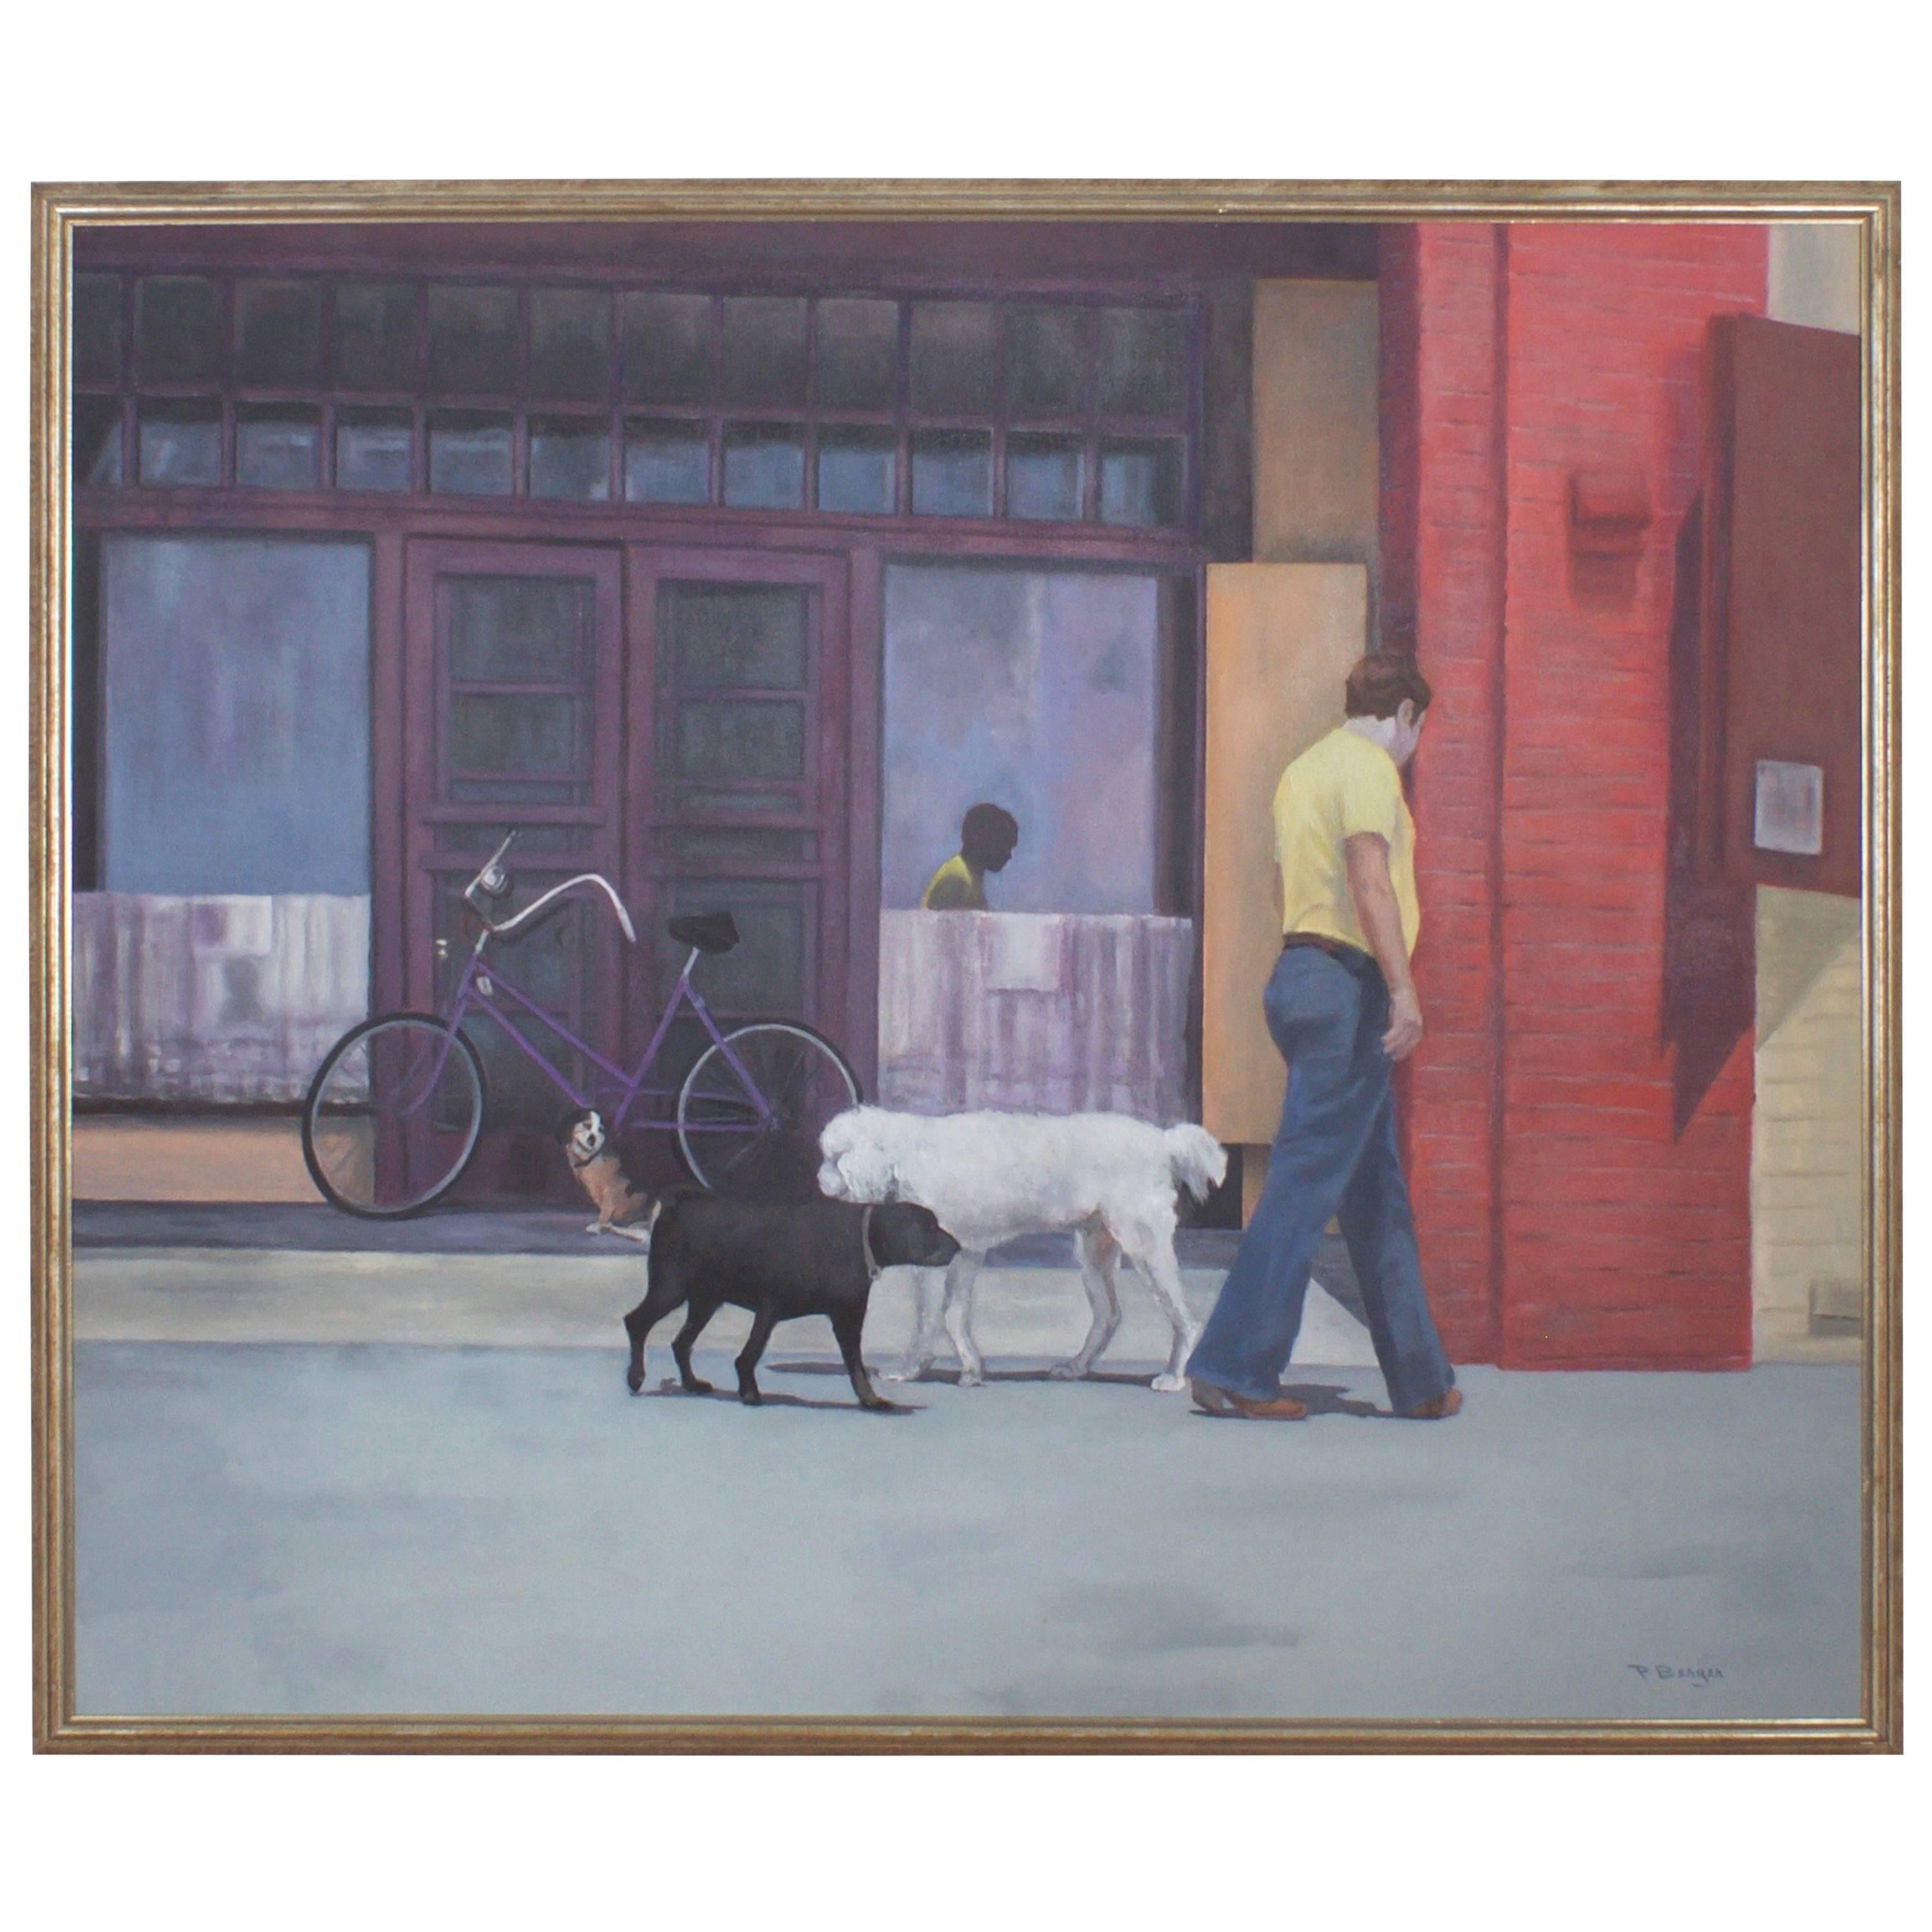 Acrylic Painting on Canvas of a Street Scene with Dogs by Paul Berger